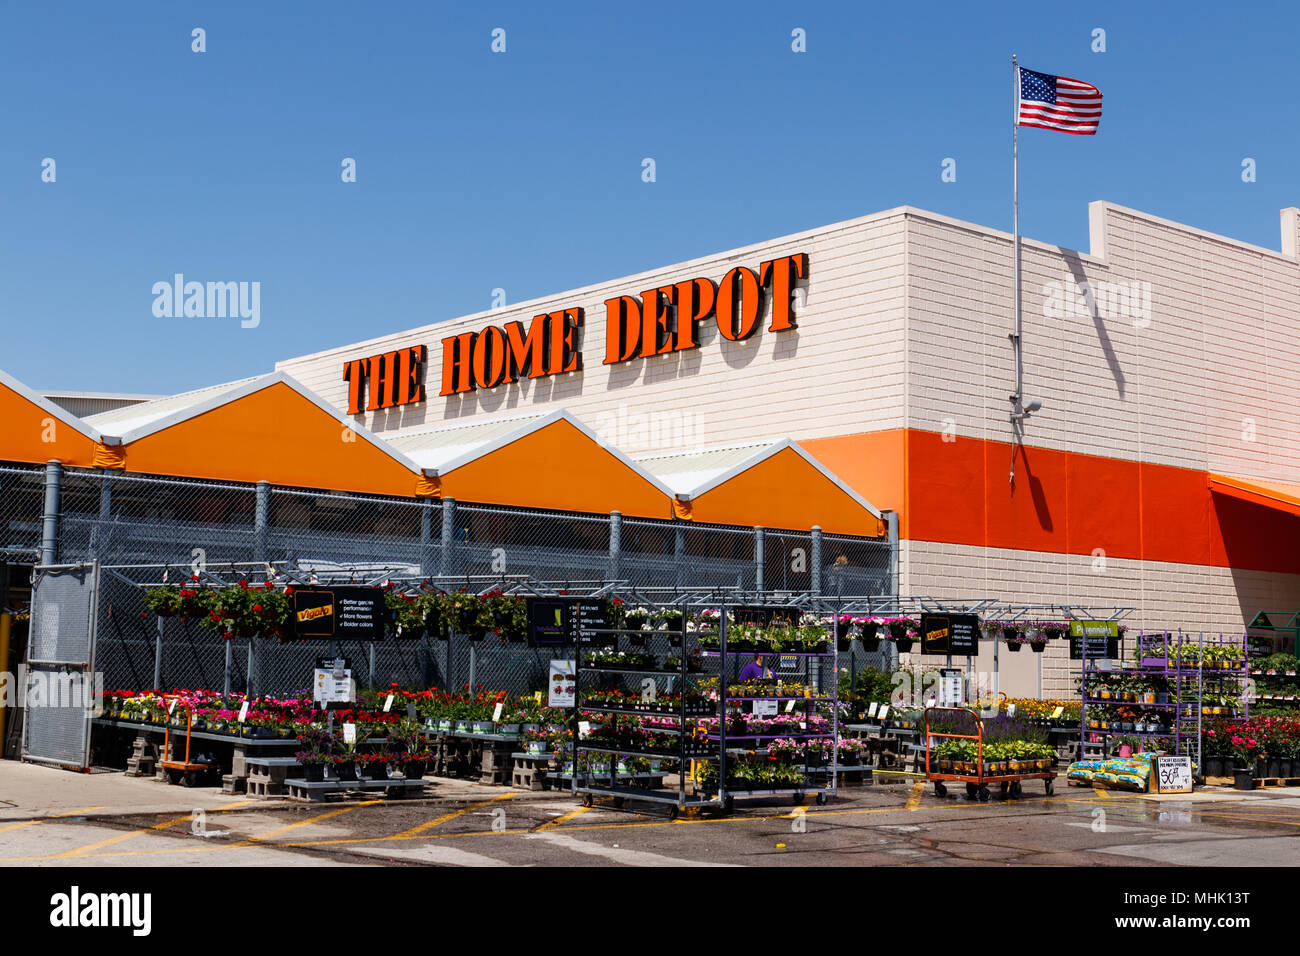 Indianapolis - Circa May 2018: Home Depot Location flying the American flag. Home Depot is the Largest Home Improvement Retailer in the US I Stock Photo